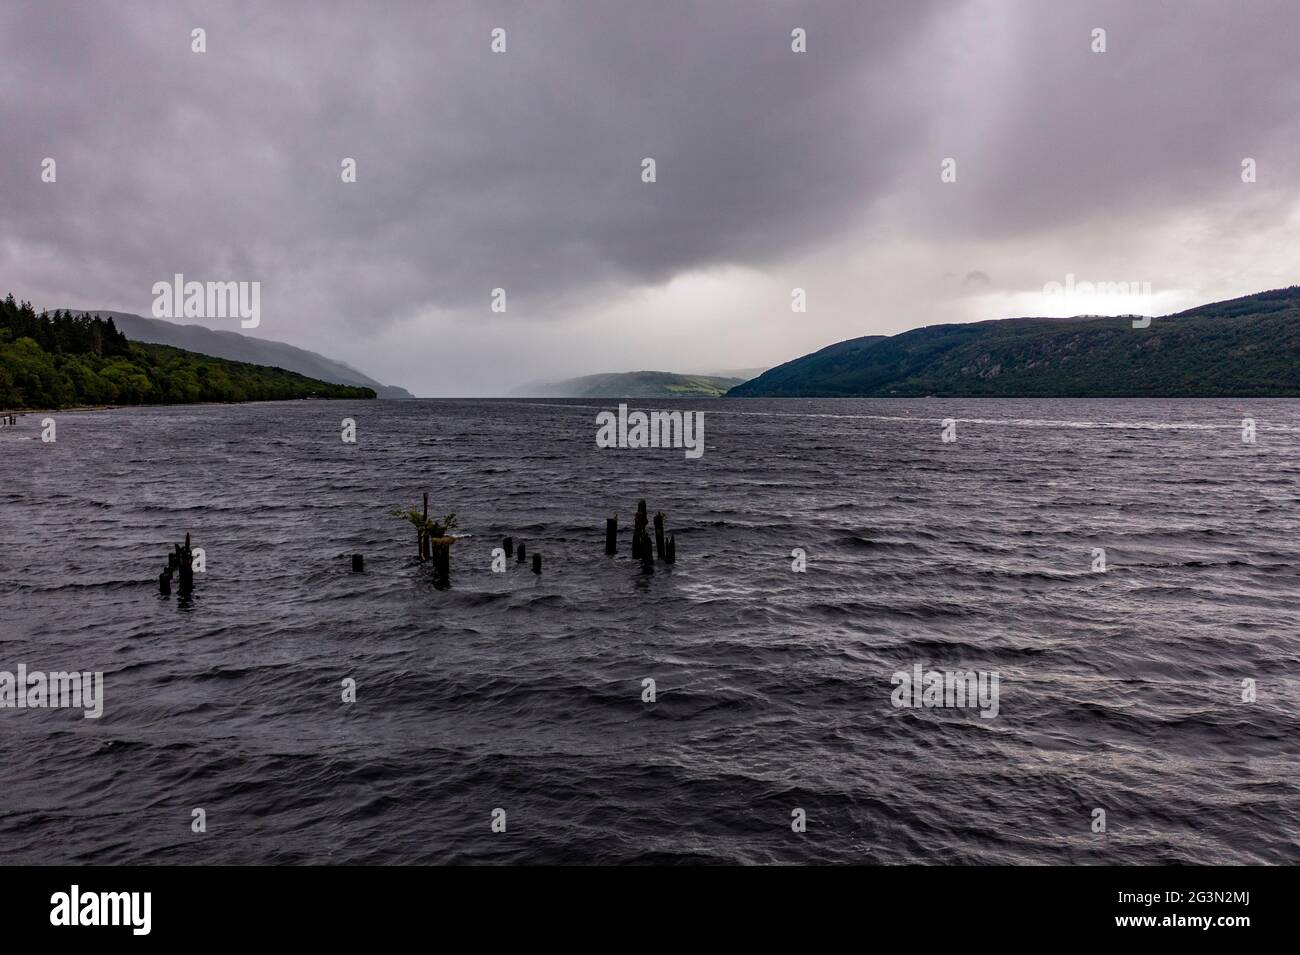 Loch Ness, Scotland, UK. 13 June 2021. Pictured: Drone aerial photography view from above of Loch Ness looking down the Great Glen towards Urquhart Castle. Loch Ness is famous for the Loch Ness Monster AKA Nessie.  Credit: Colin Fisher/CDFIMAGES.COM Stock Photo